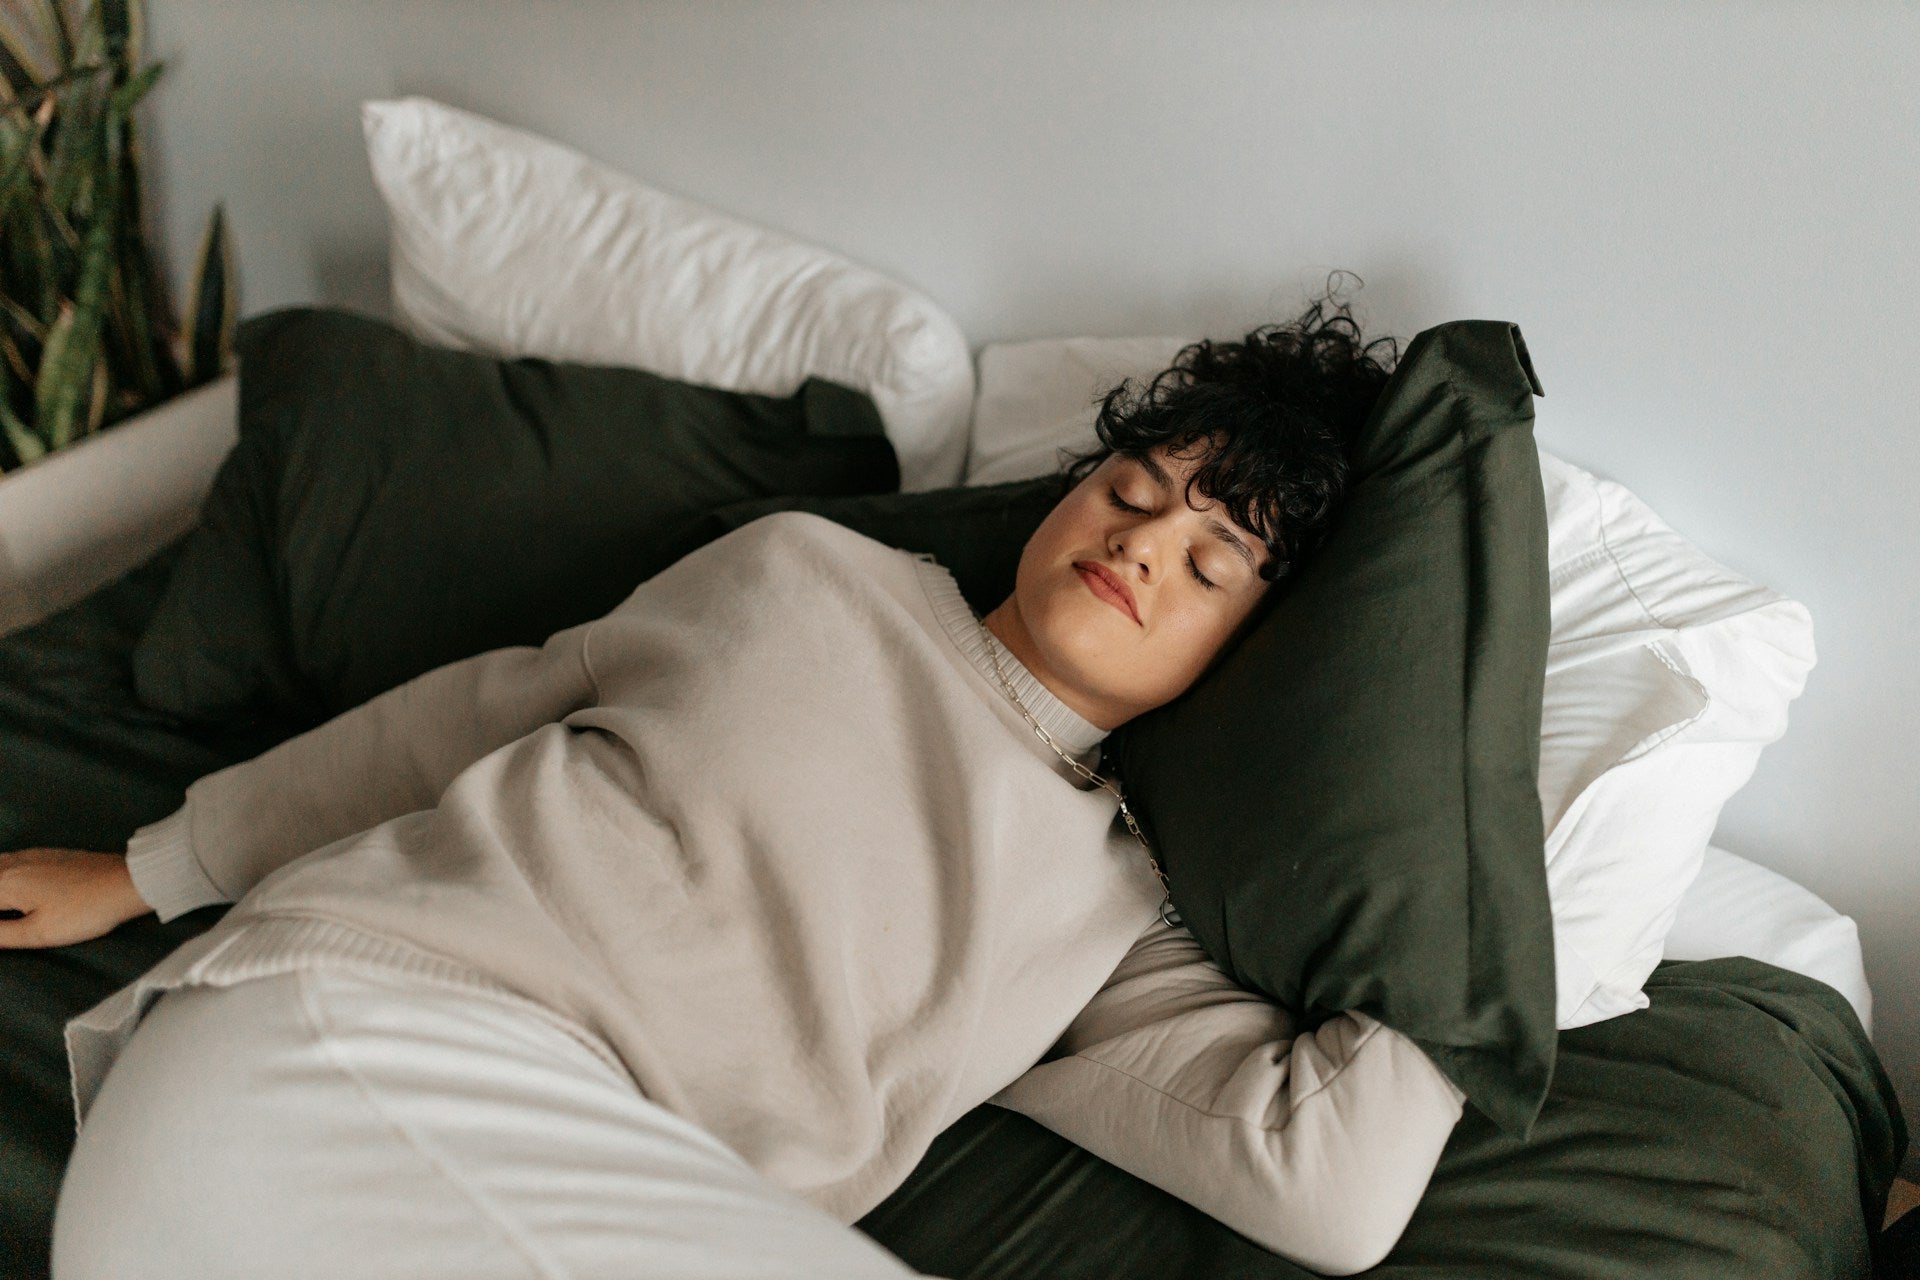 Sleeping dark-haired woman wearing a beige outfit